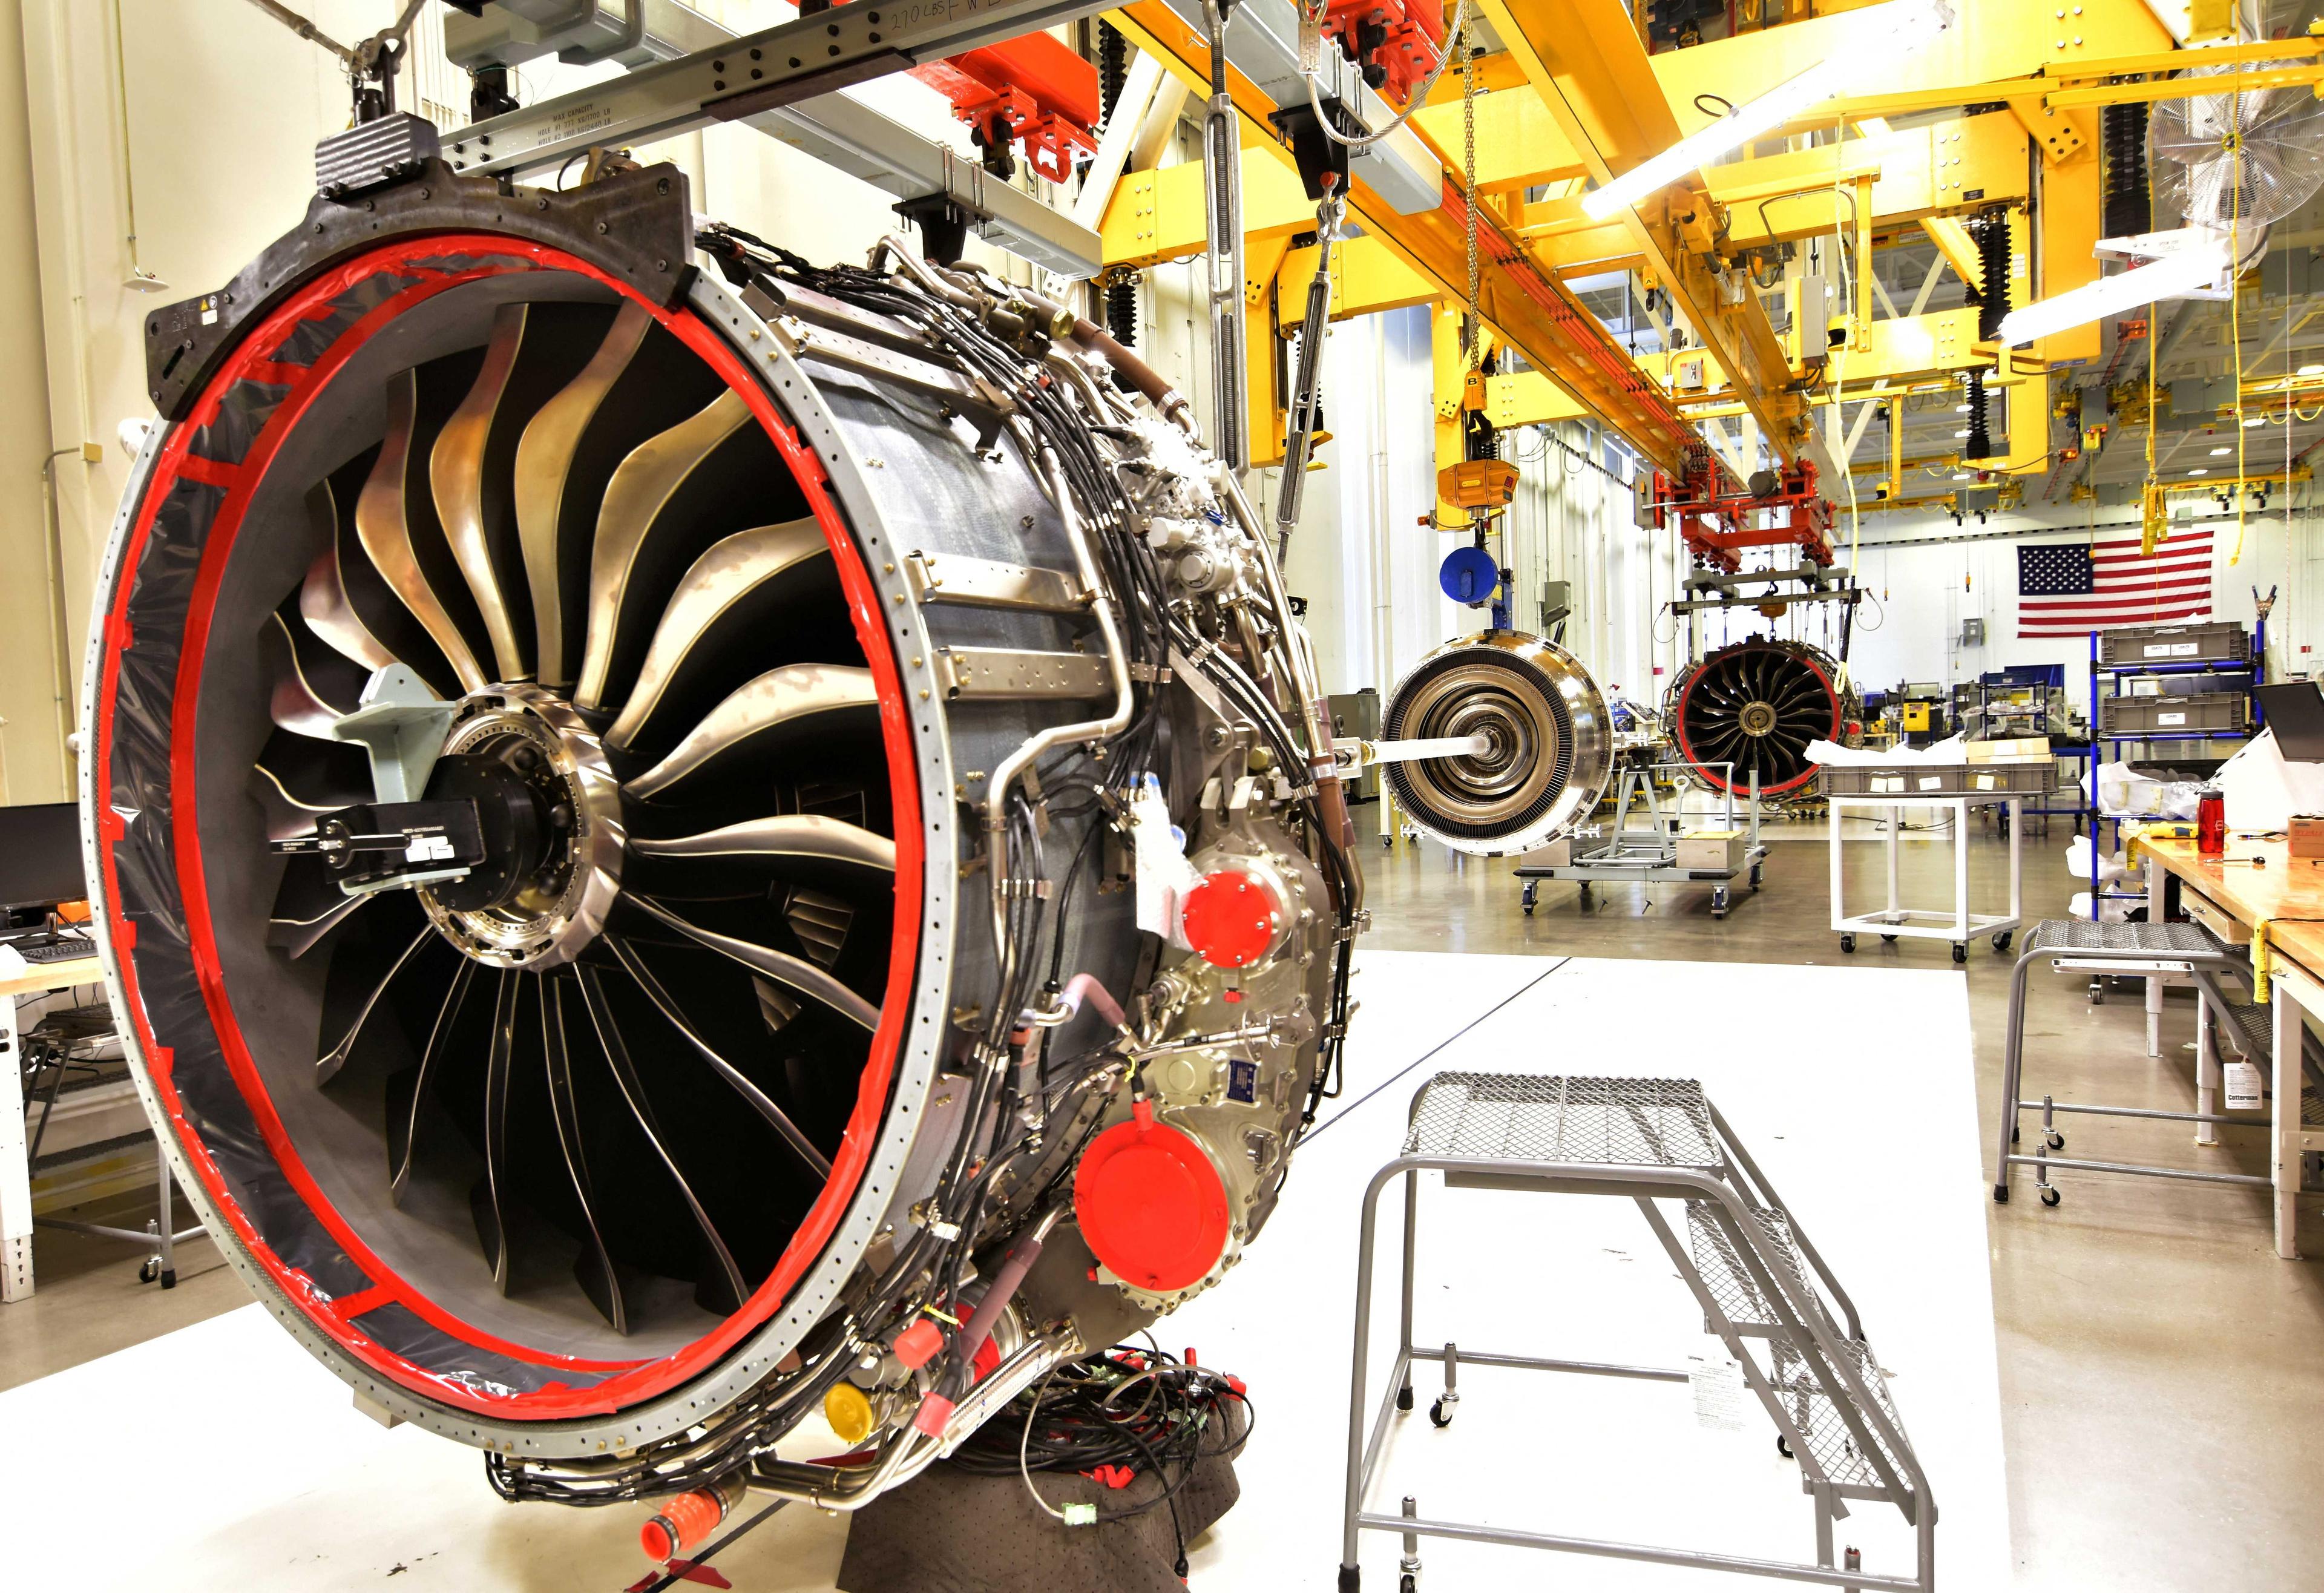 Technicians build Leap engines for jetliners at a new, highly automated General Electric (GE) factory in Lafayette, Indiana, US on March 29, 2017. Photo: Reuters